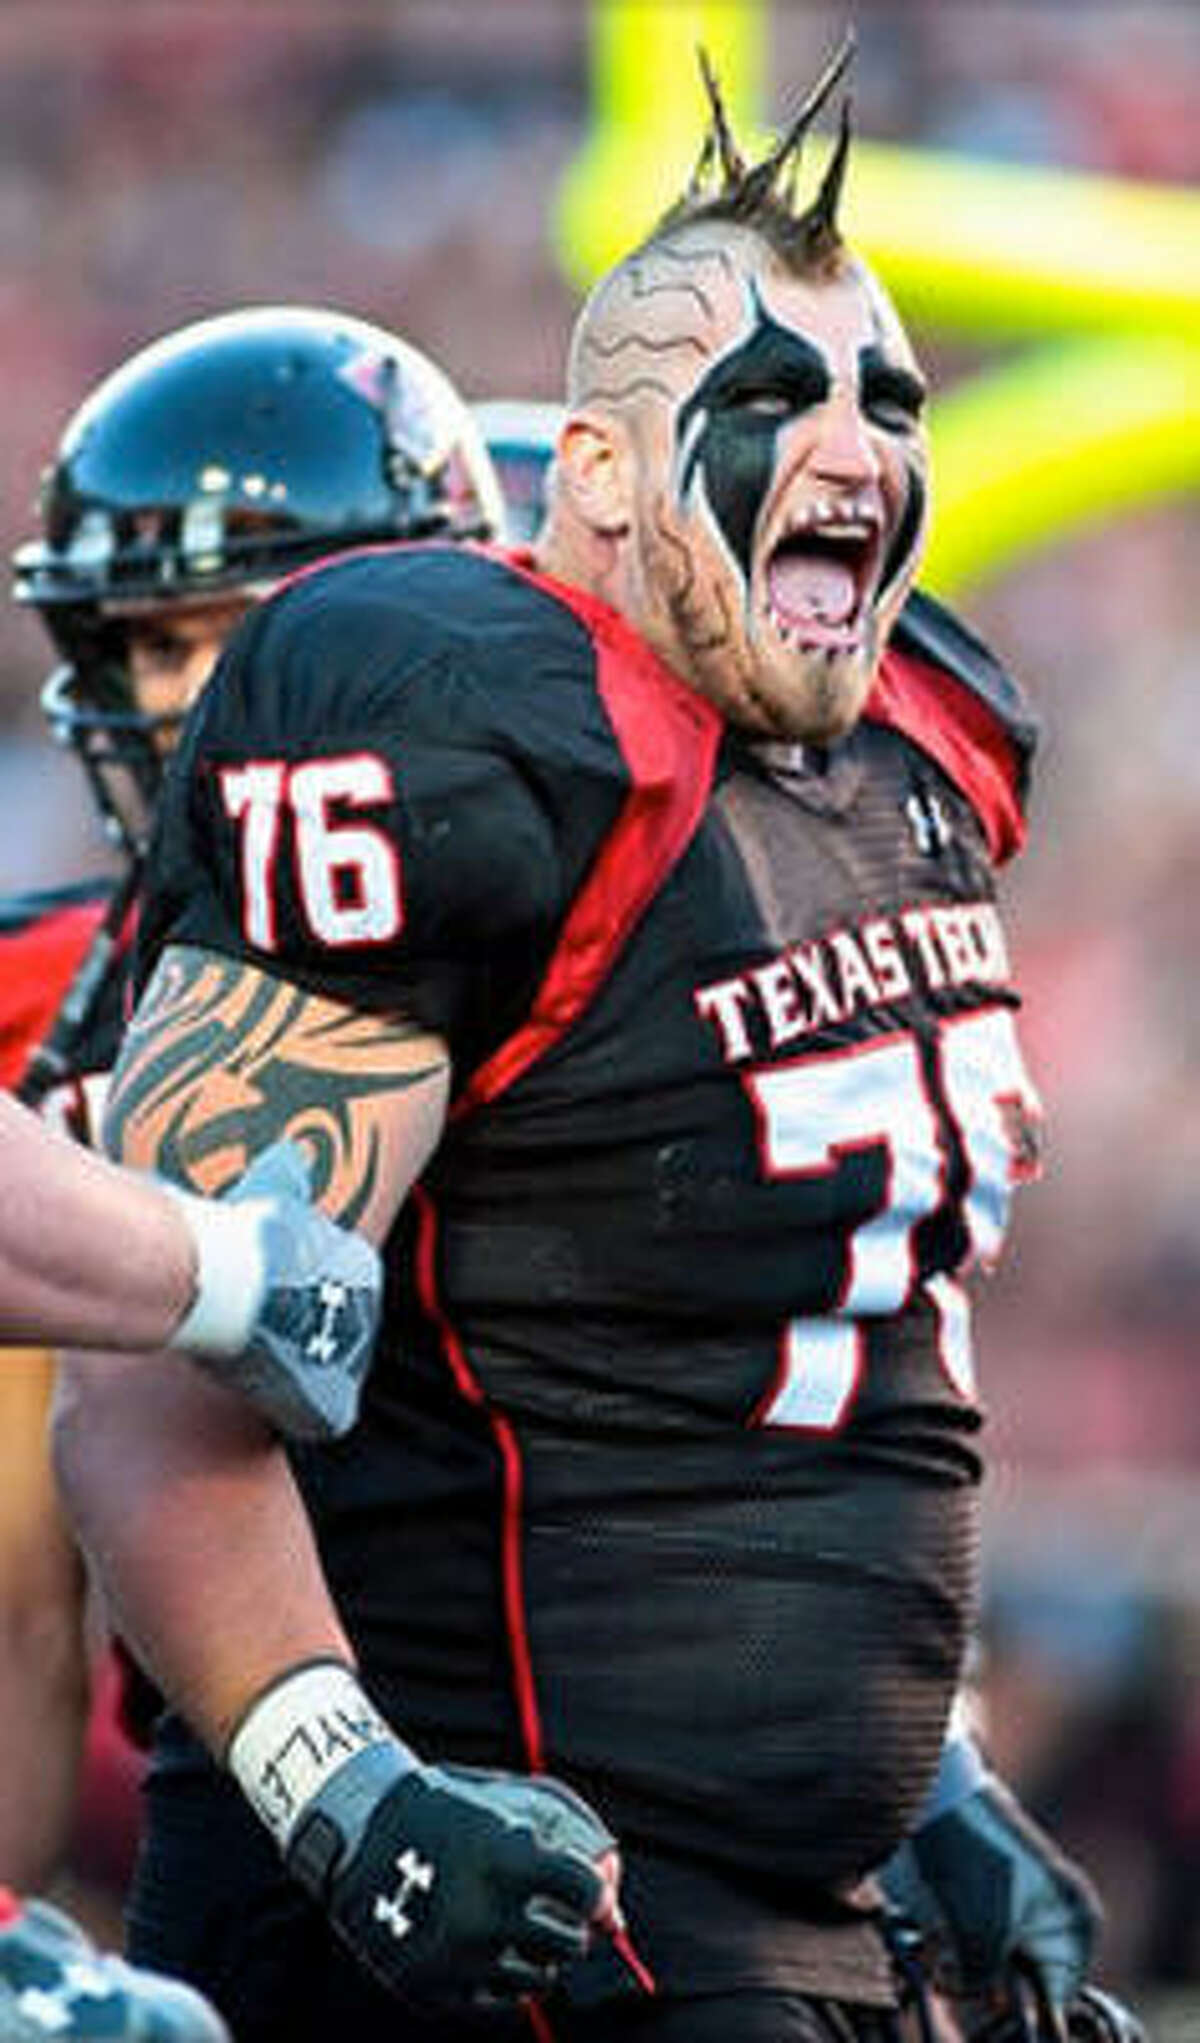 Brandon Carter, Texas Tech offensive lineman The 6-foot-7, 334-pound giant spends his Saturday afternoons as the caretaker for Tech quarterbacks. He goes by the nickname “Mankind.”